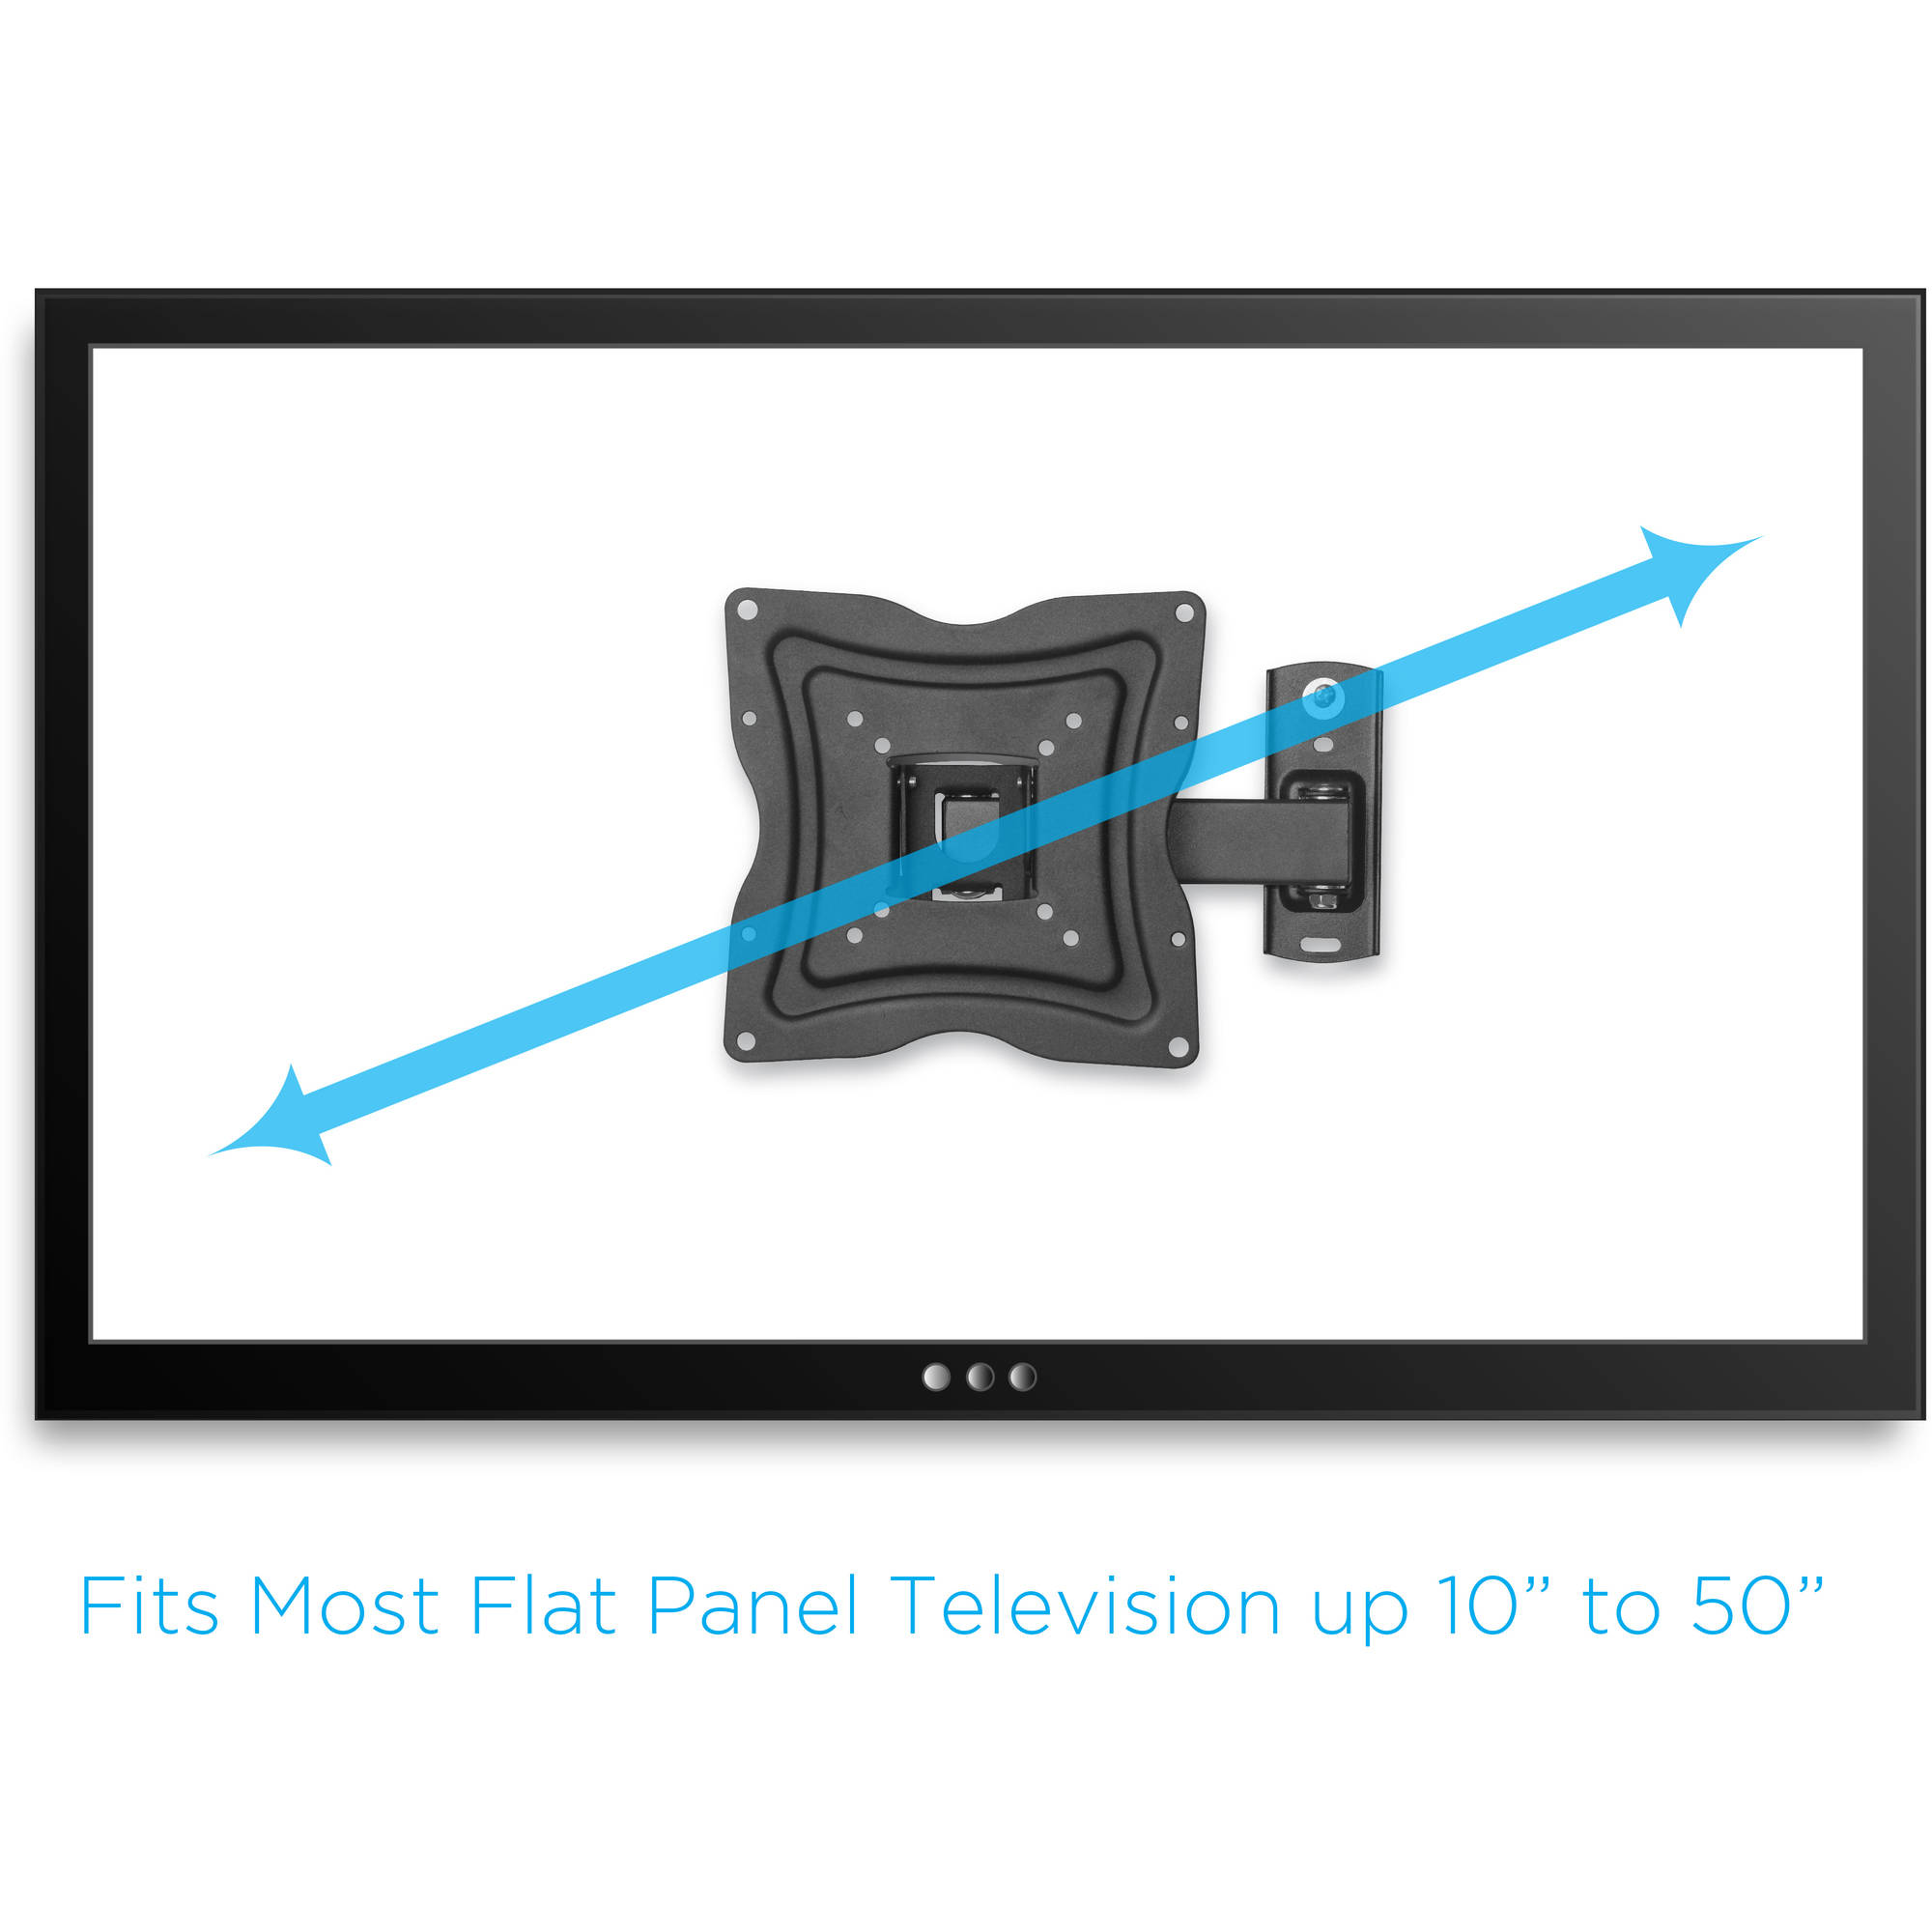 Full Motion TV Wall Mount 10" to 50" TV Display Tilt, Swivel Articulating Arm, HDMI Cable Included - image 5 of 7